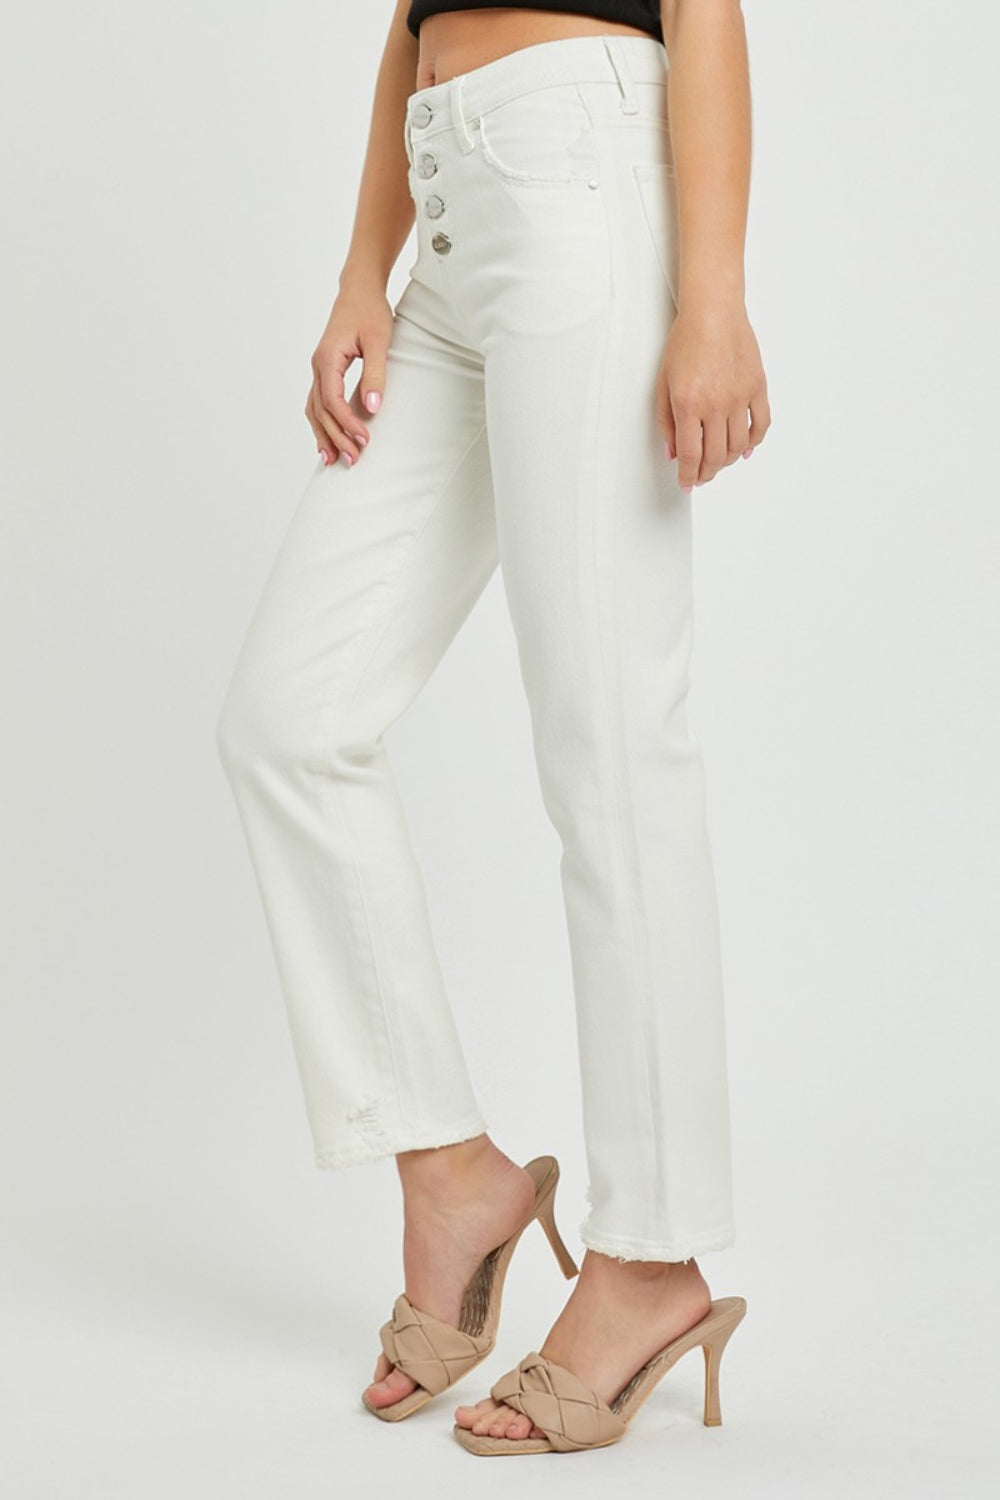 White mid-rise jeans designed with a classic button-fly front from RISEN.